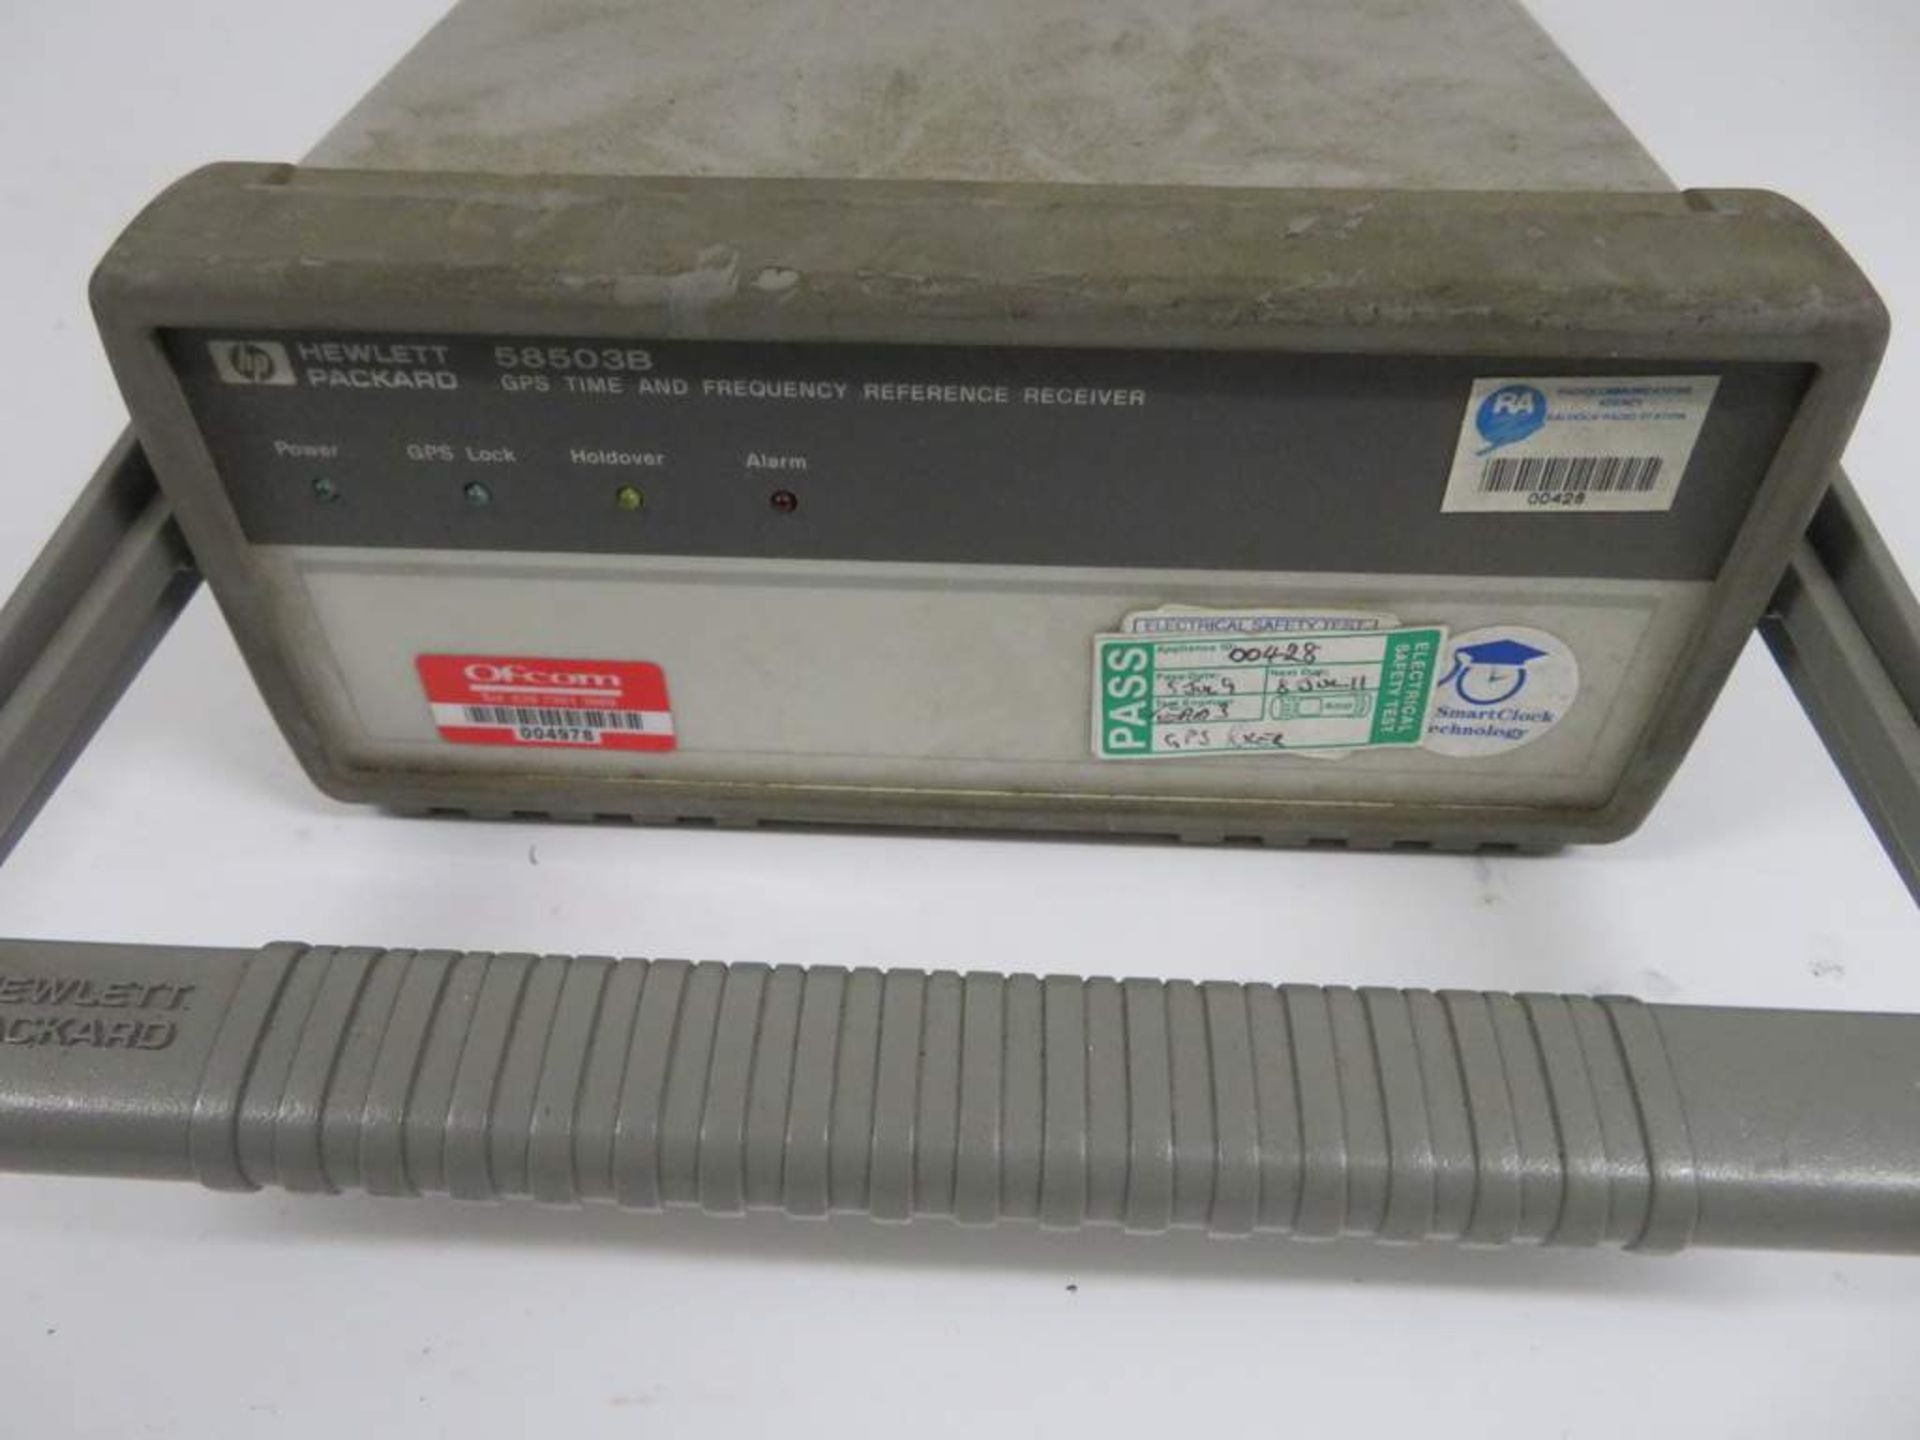 Hewlett Packard 58503B GPS time and frequency reference receiver - Bild 2 aus 3